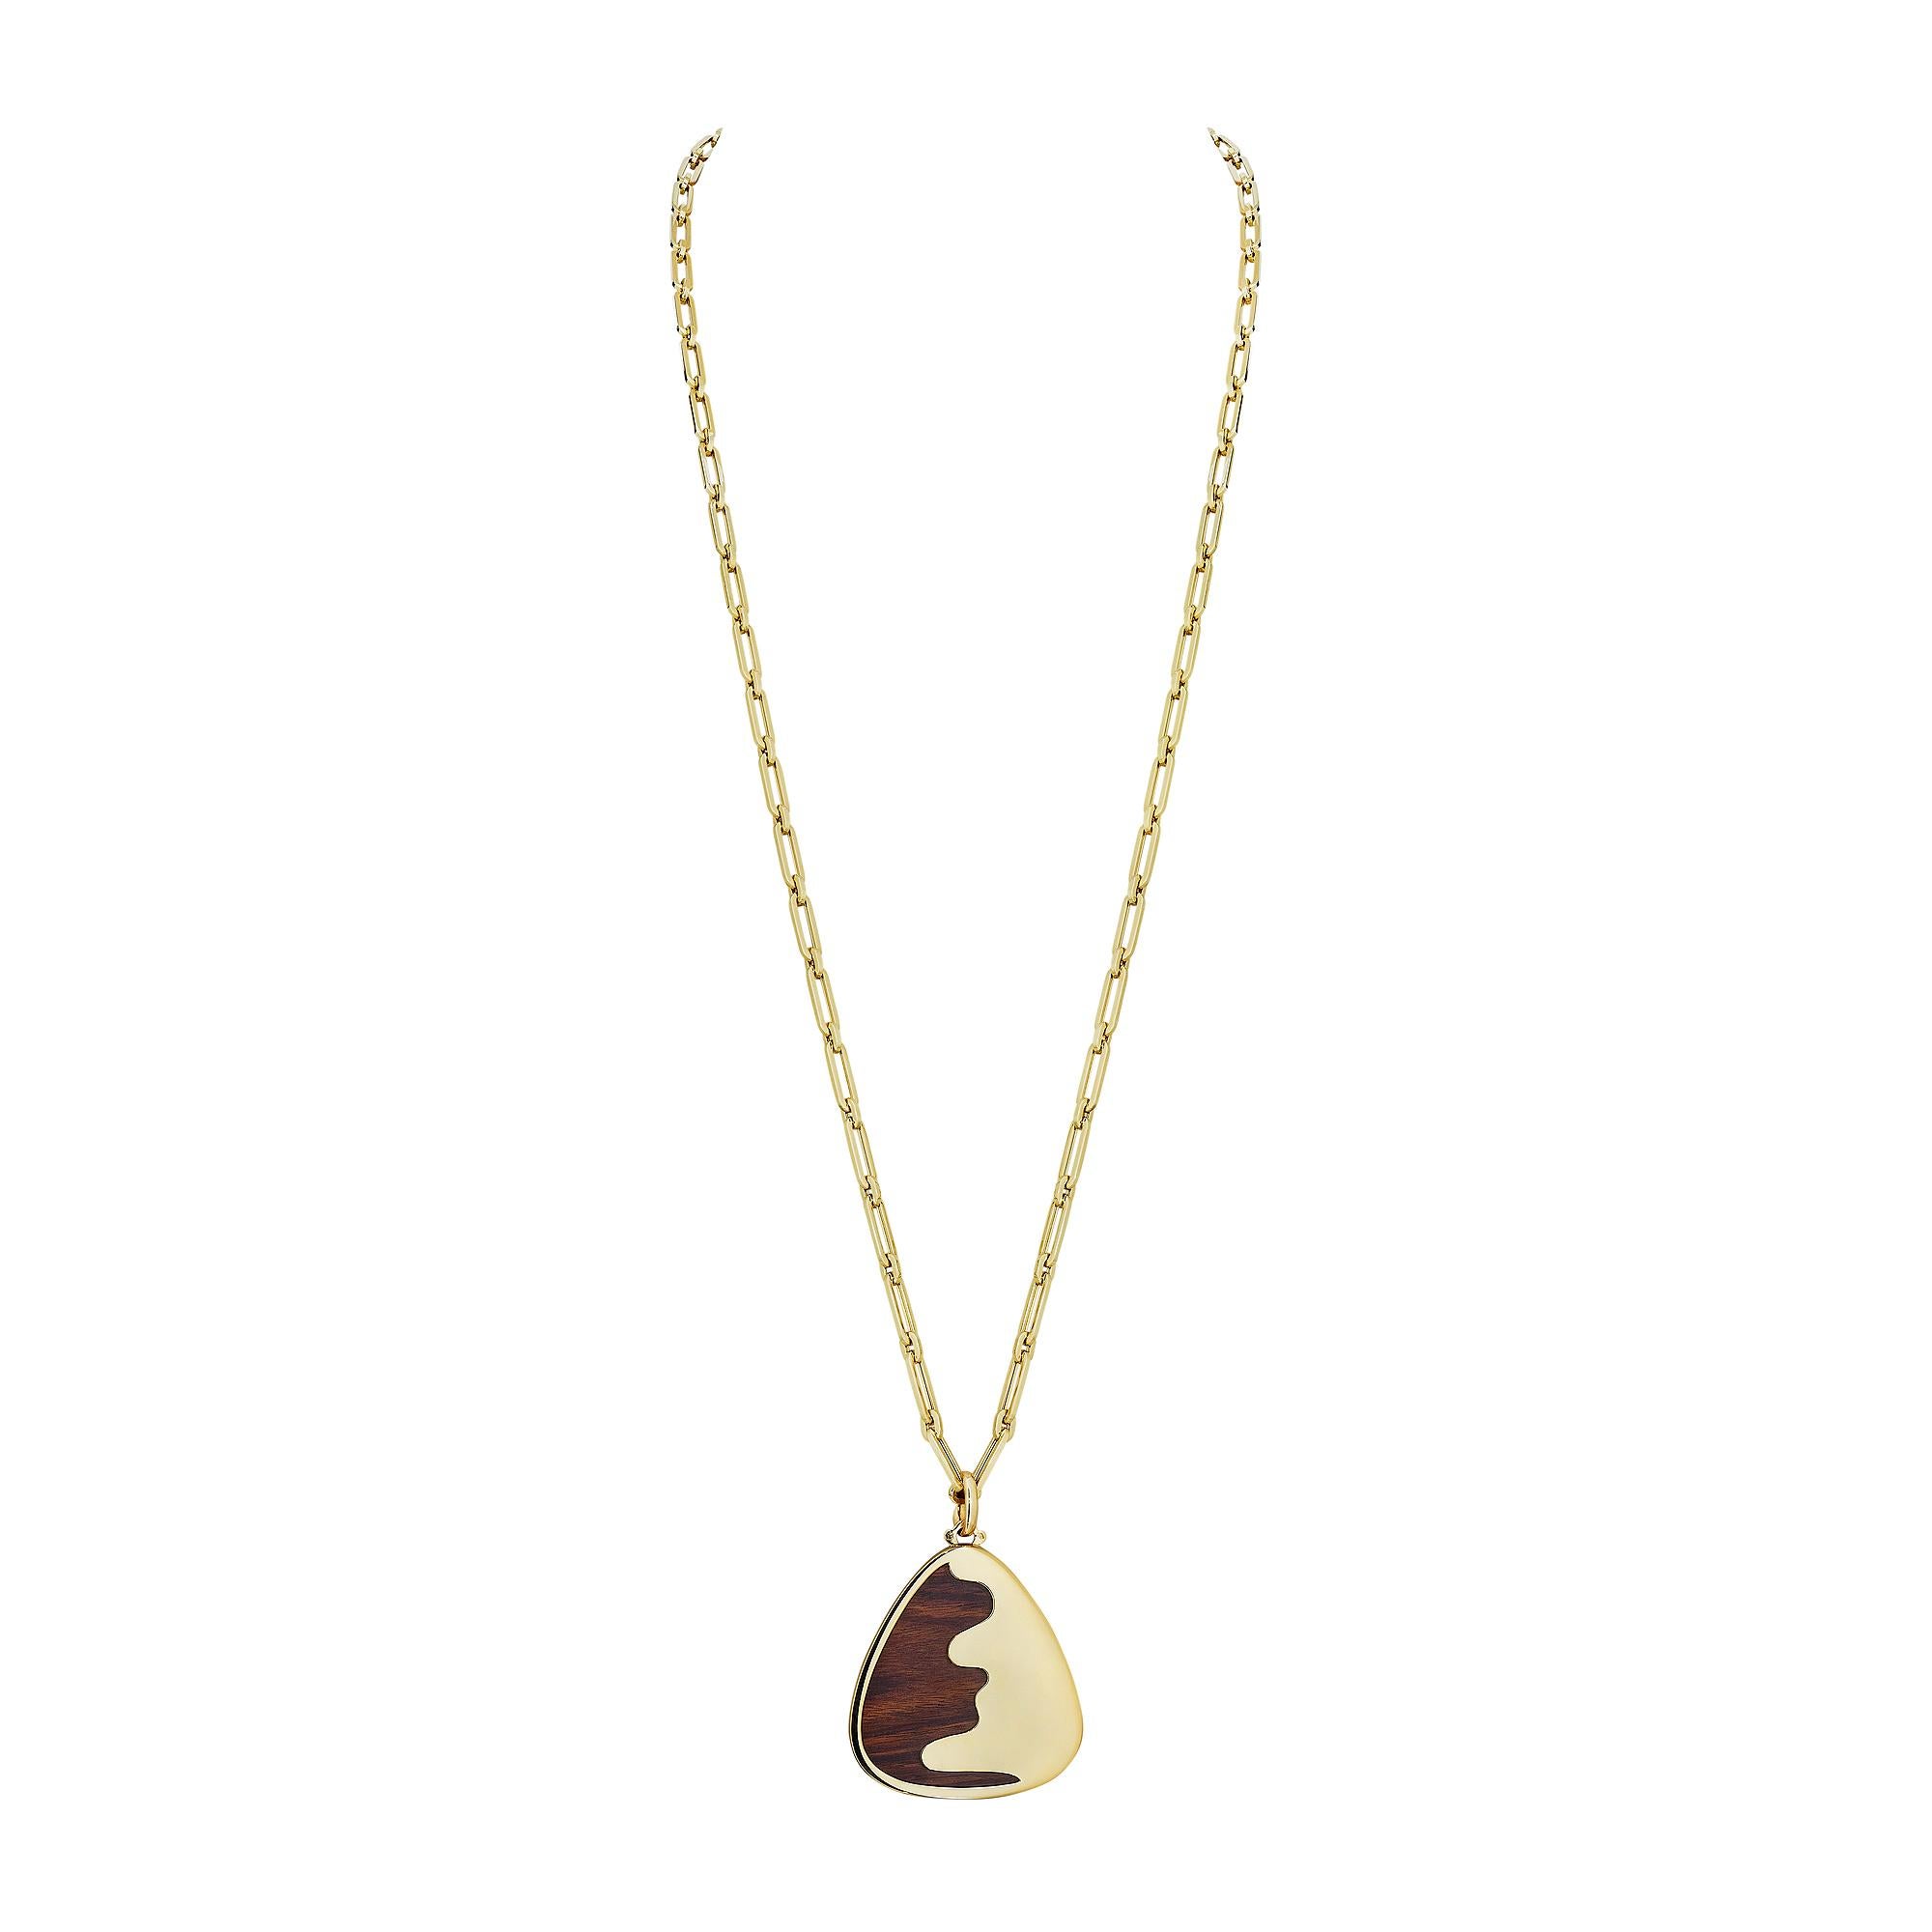 This Van Cleef & Arpels modernist abstract pendant is the perfect marriage of rosewood and polished yellow gold.  A triangular hand carved piece of rosewood is organically overlapped and framed with polished 18 karat gold, resulting in an incredible